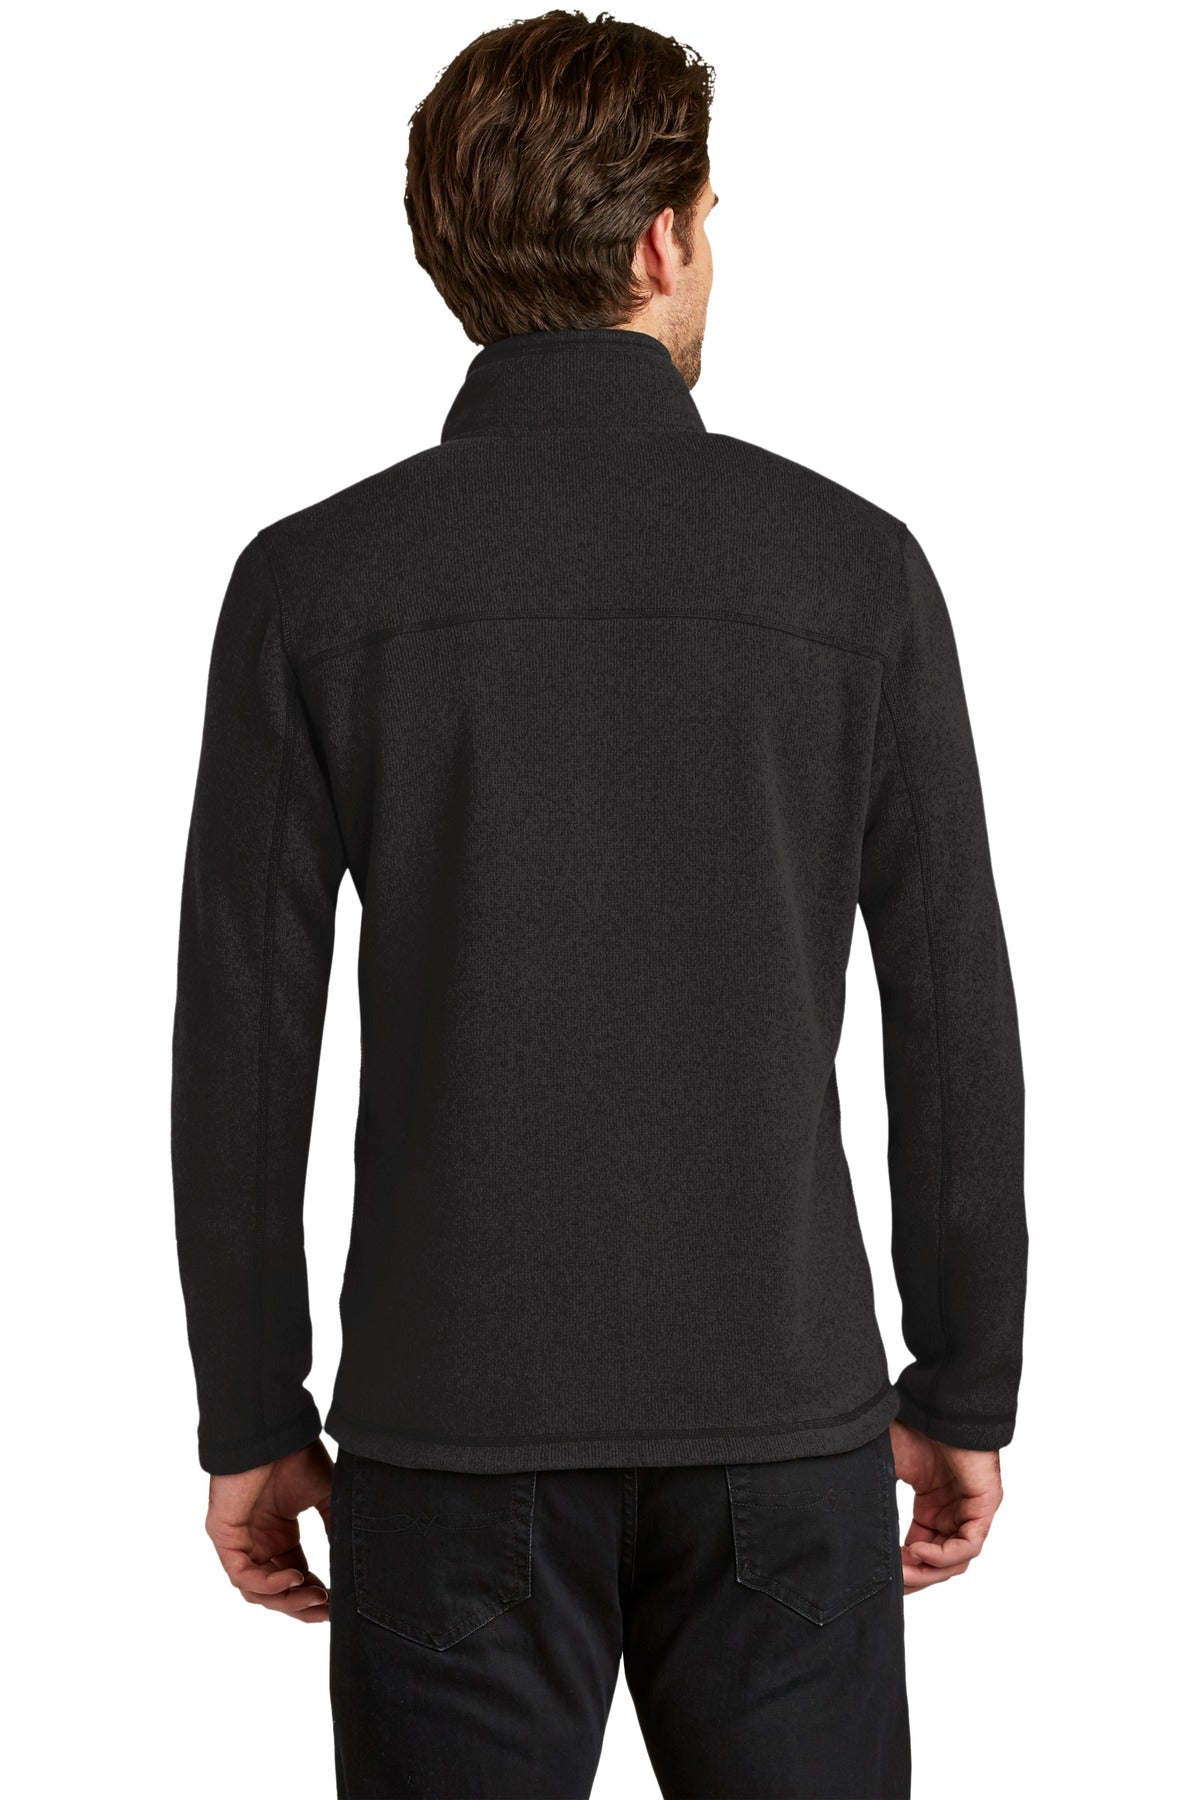 The North Face Sweater Fleece Jacket. NF0A3LH7